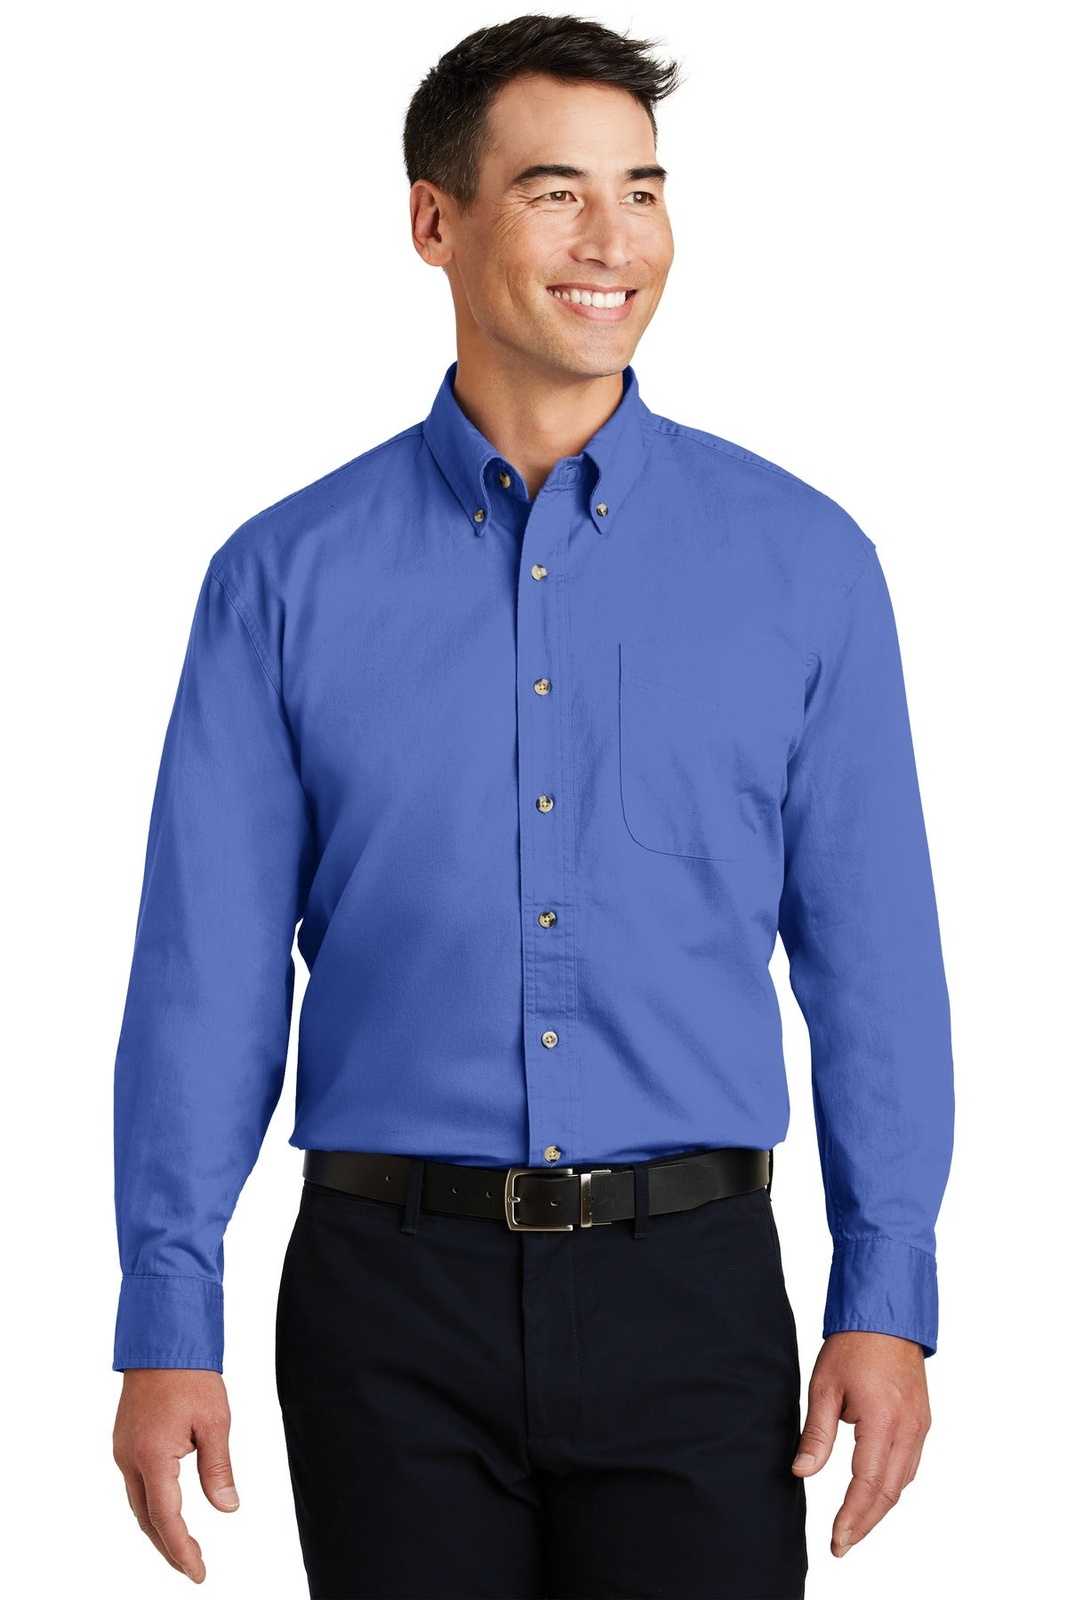 Port Authority S600T Long Sleeve Twill Shirt - Faded Blue - HIT a Double - 1